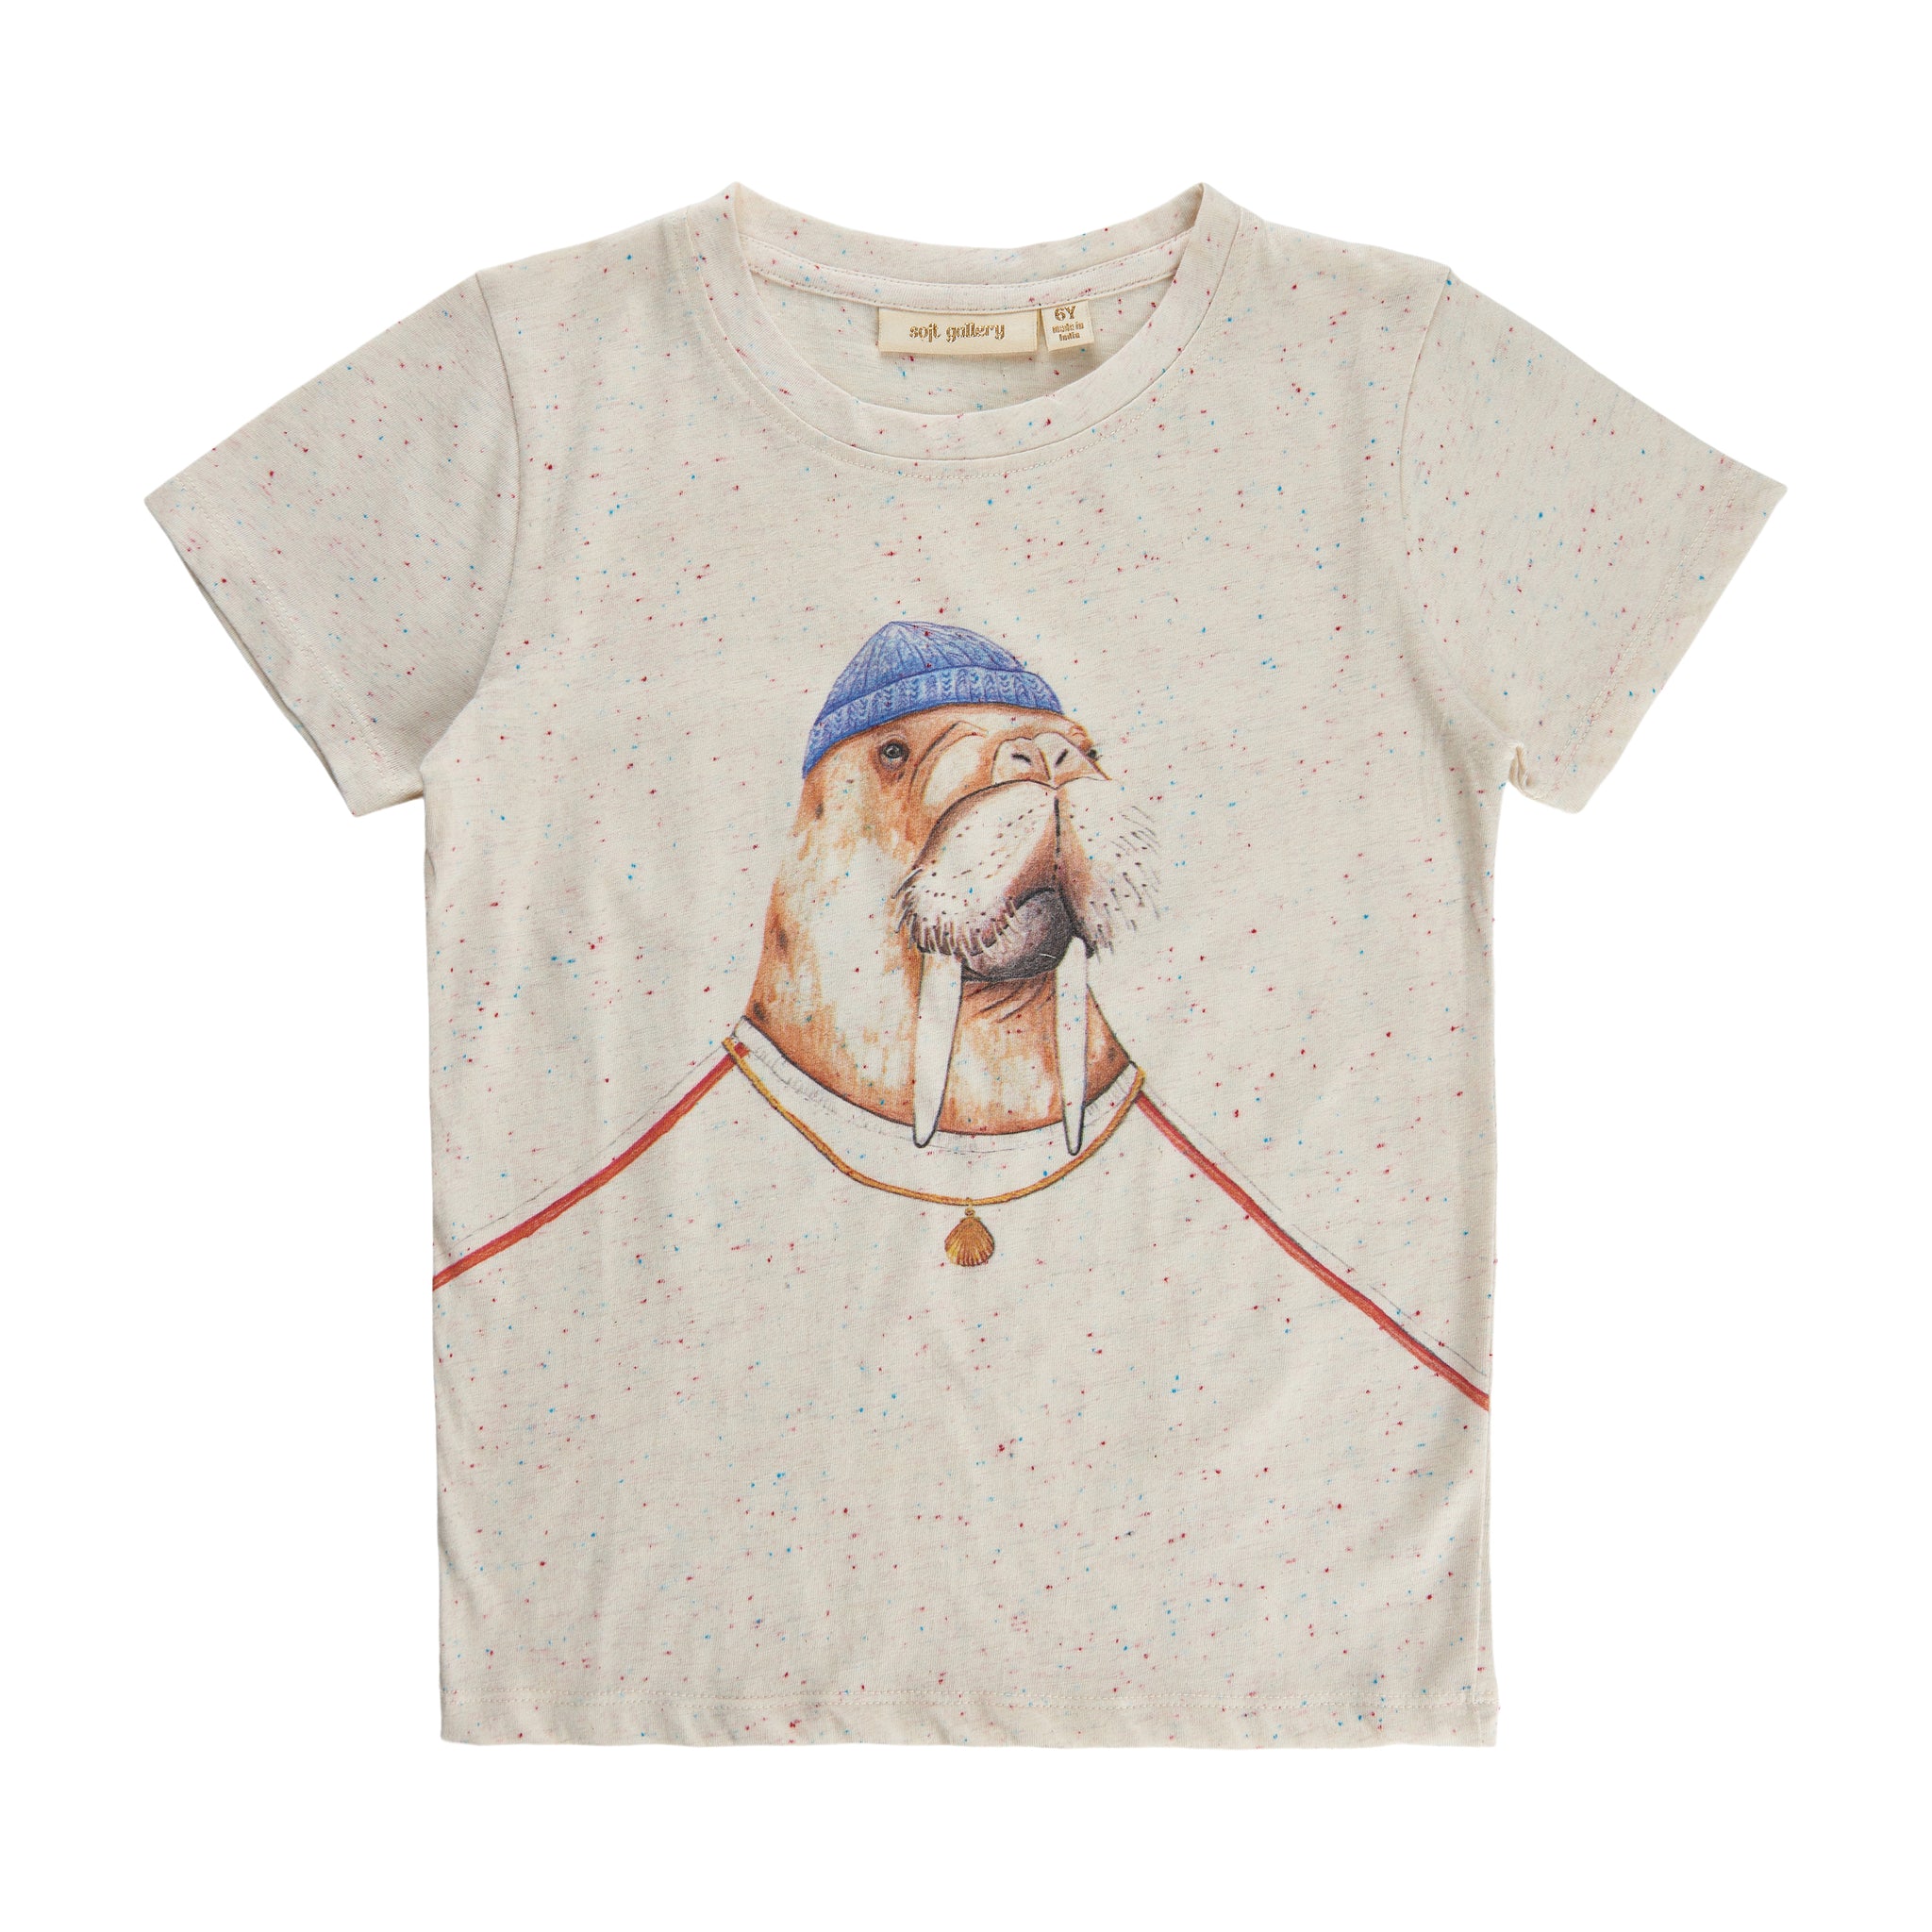 Soft Gallery - Bass Walrus SS Tee - Antique White